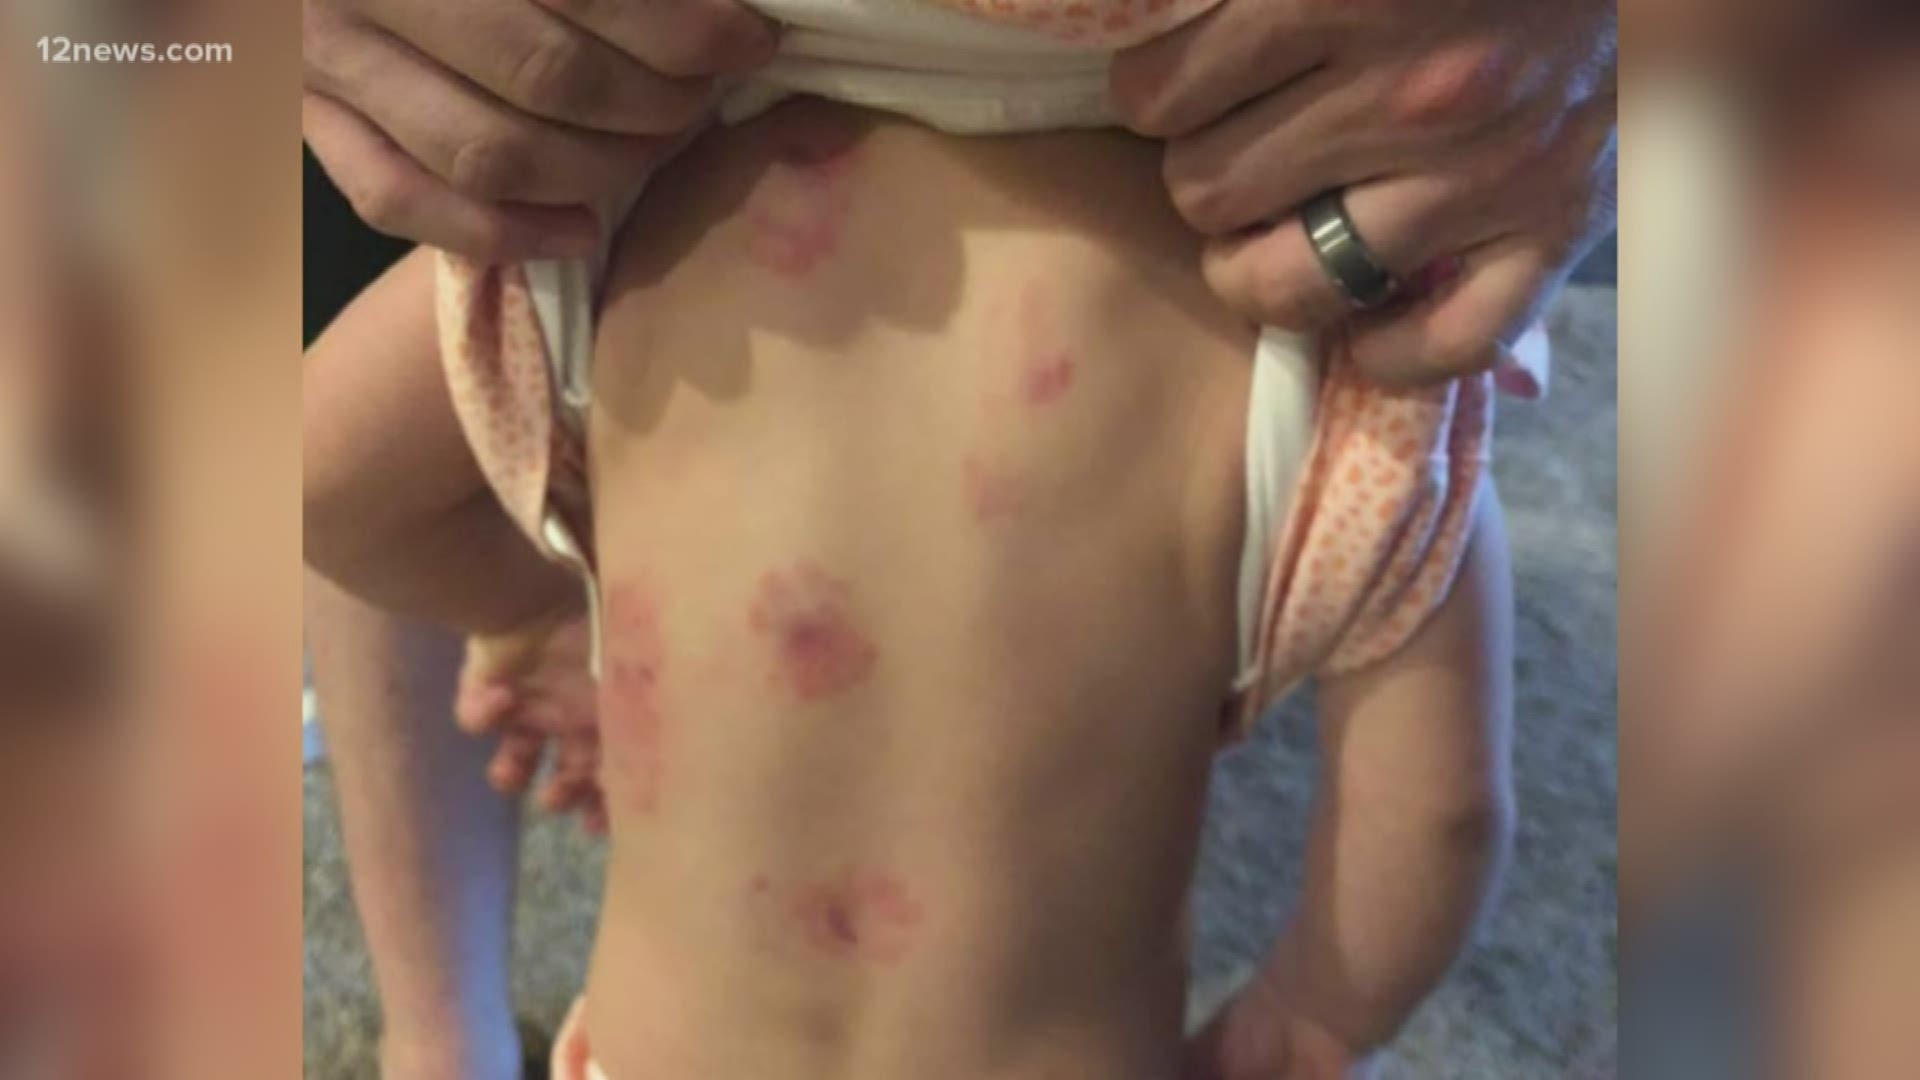 Maricopa parents want answers after their daughter was bitten 8 times at a daycare. The parents said a teacher told them their daughter was bitten, but it wasn't until later the parents found out how many times she was bitten.